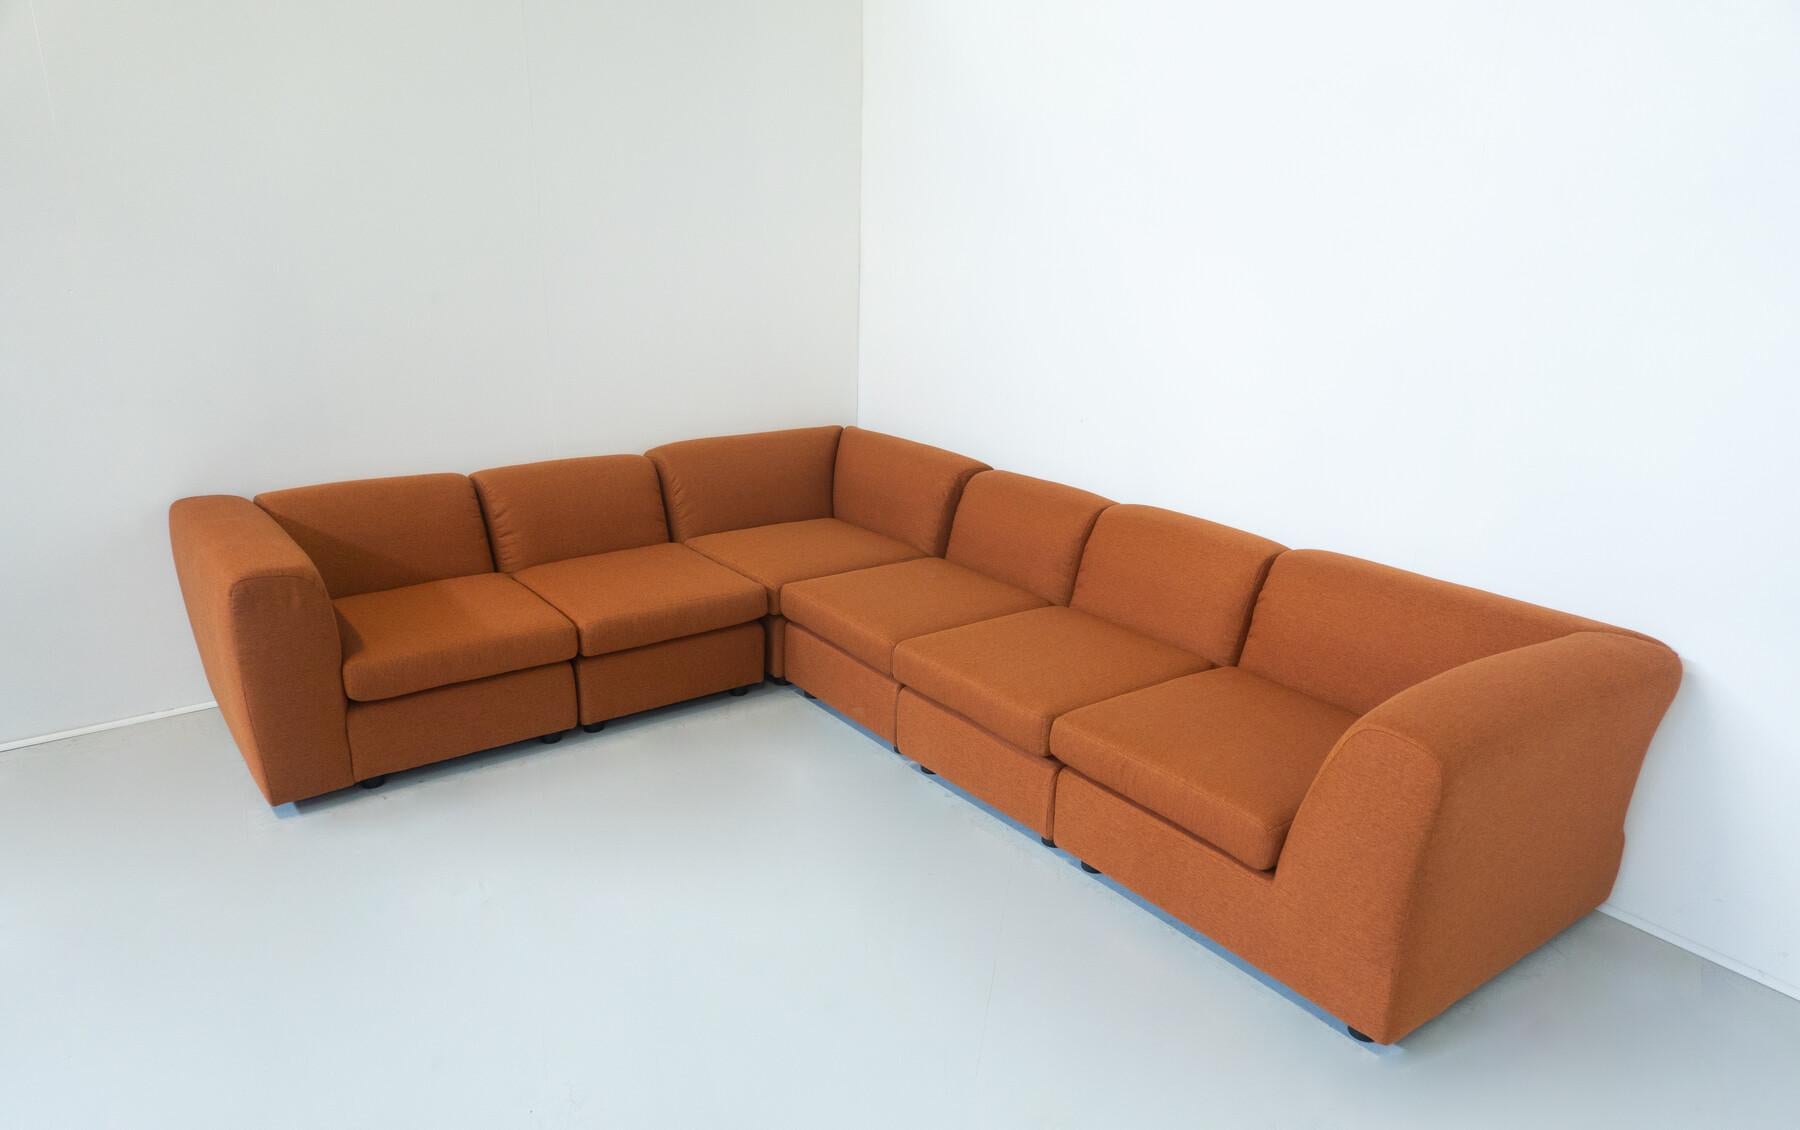 Mid-Century Modern Orange Modular Sofa, Italy, 1960s - New Upholstery In Good Condition For Sale In Brussels, BE